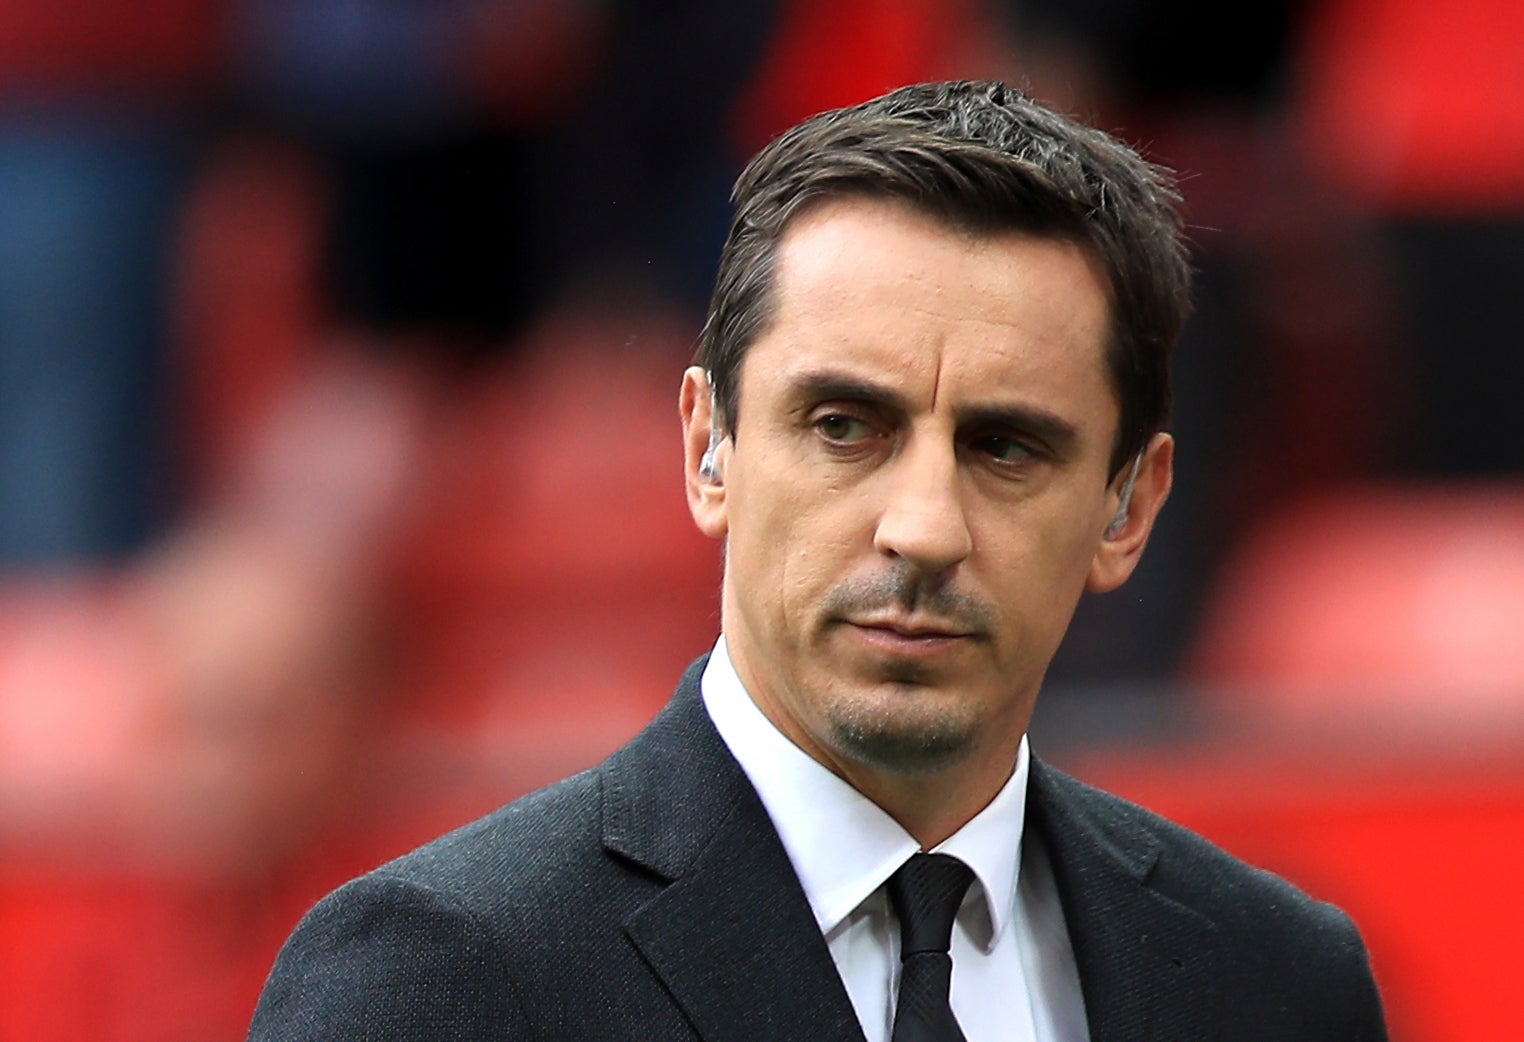 Gary Neville says the English football authorities must embrace the chance to reset the game (Mike Egerton/PA)